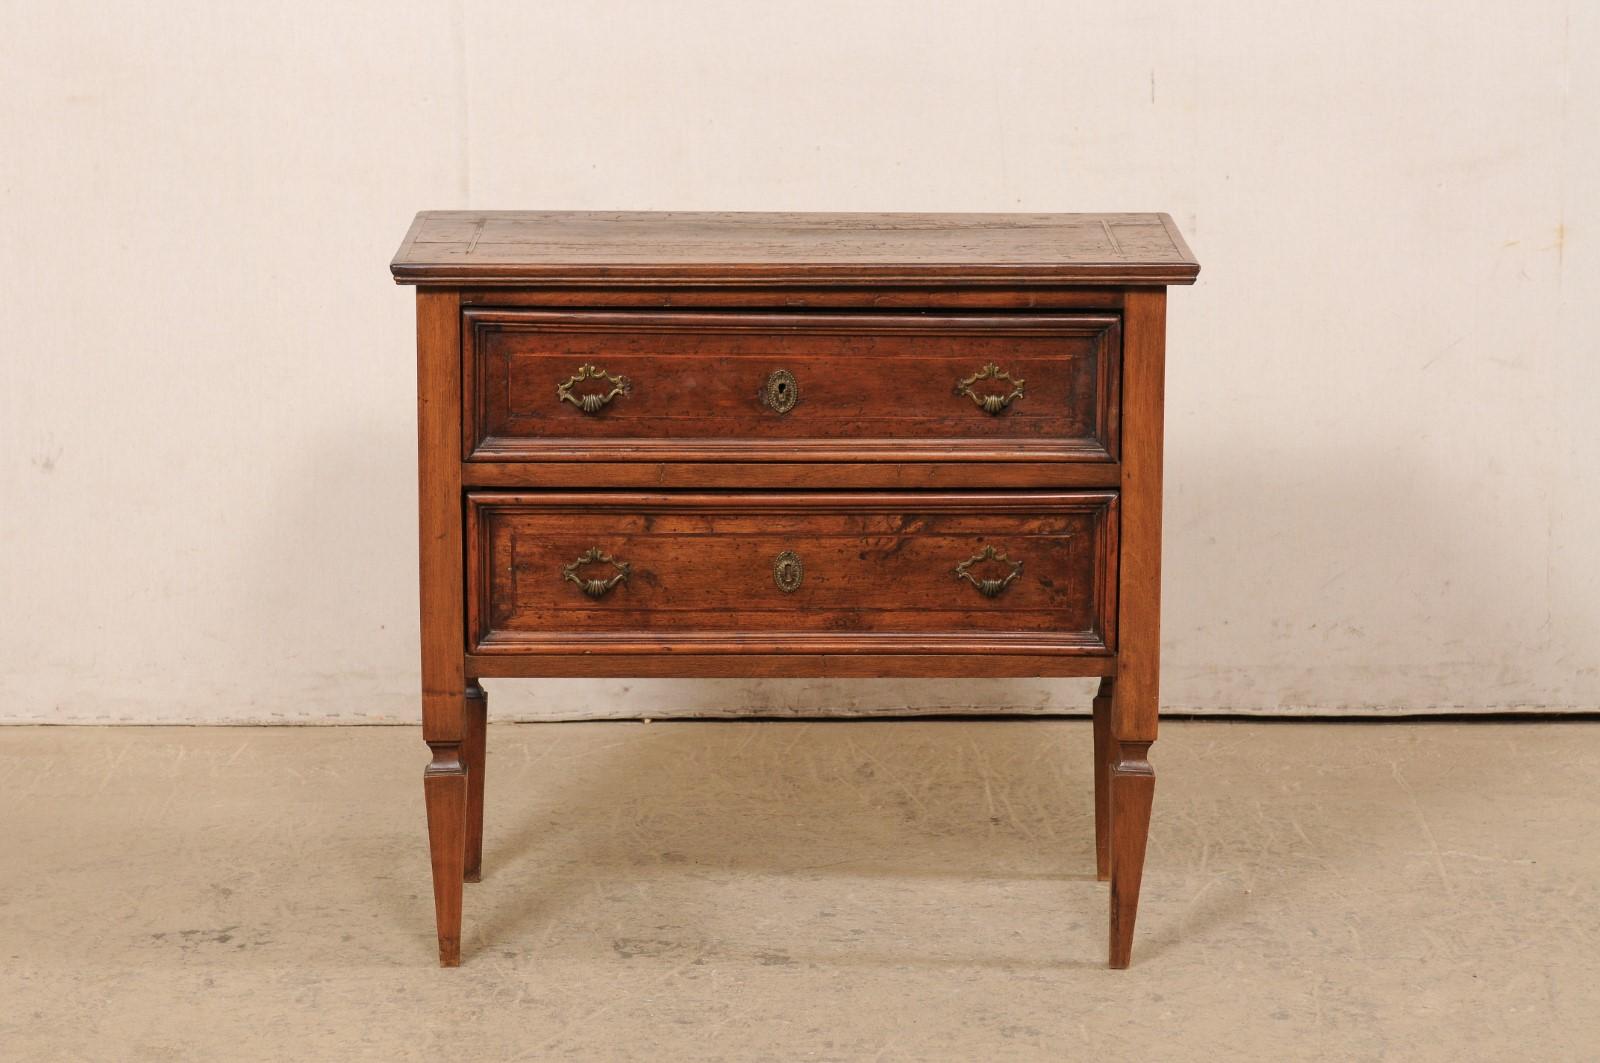 Italian Raised Two-Drawer Carved-Wood Chest w/Rococo Hardware, 19th C. For Sale 4